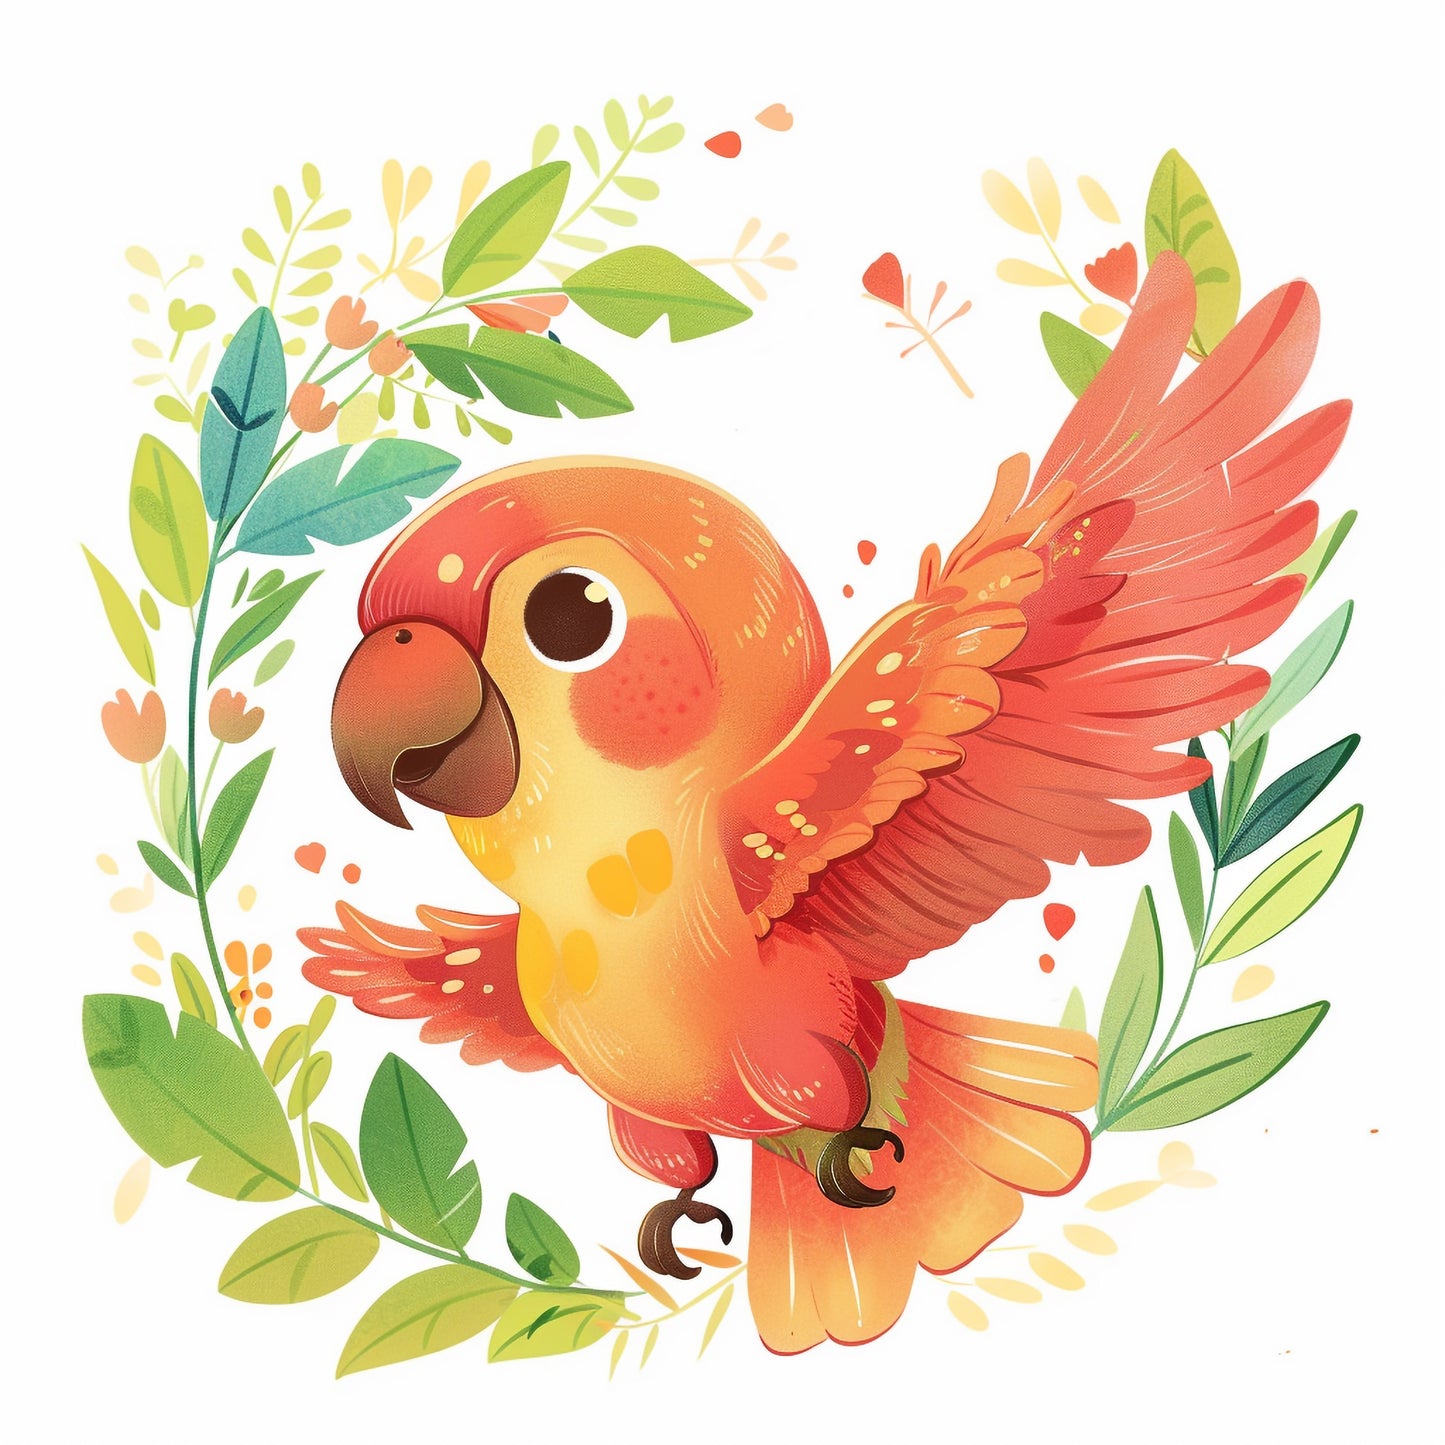 Adorable Parrot Surrounded by Whimsical Floral Wreath